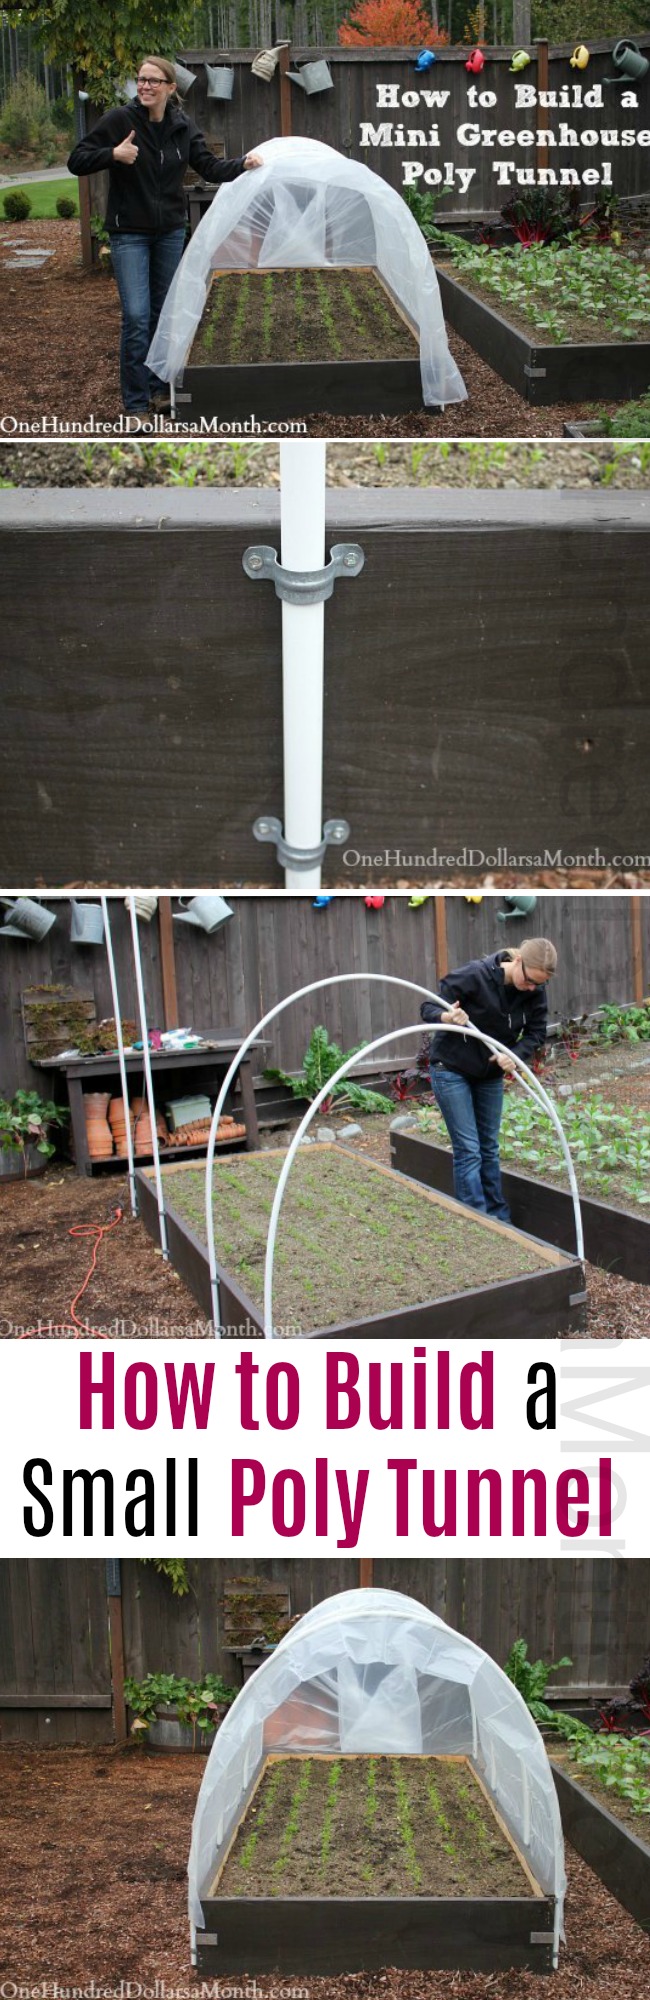 How to Build a Small Poly Tunnel